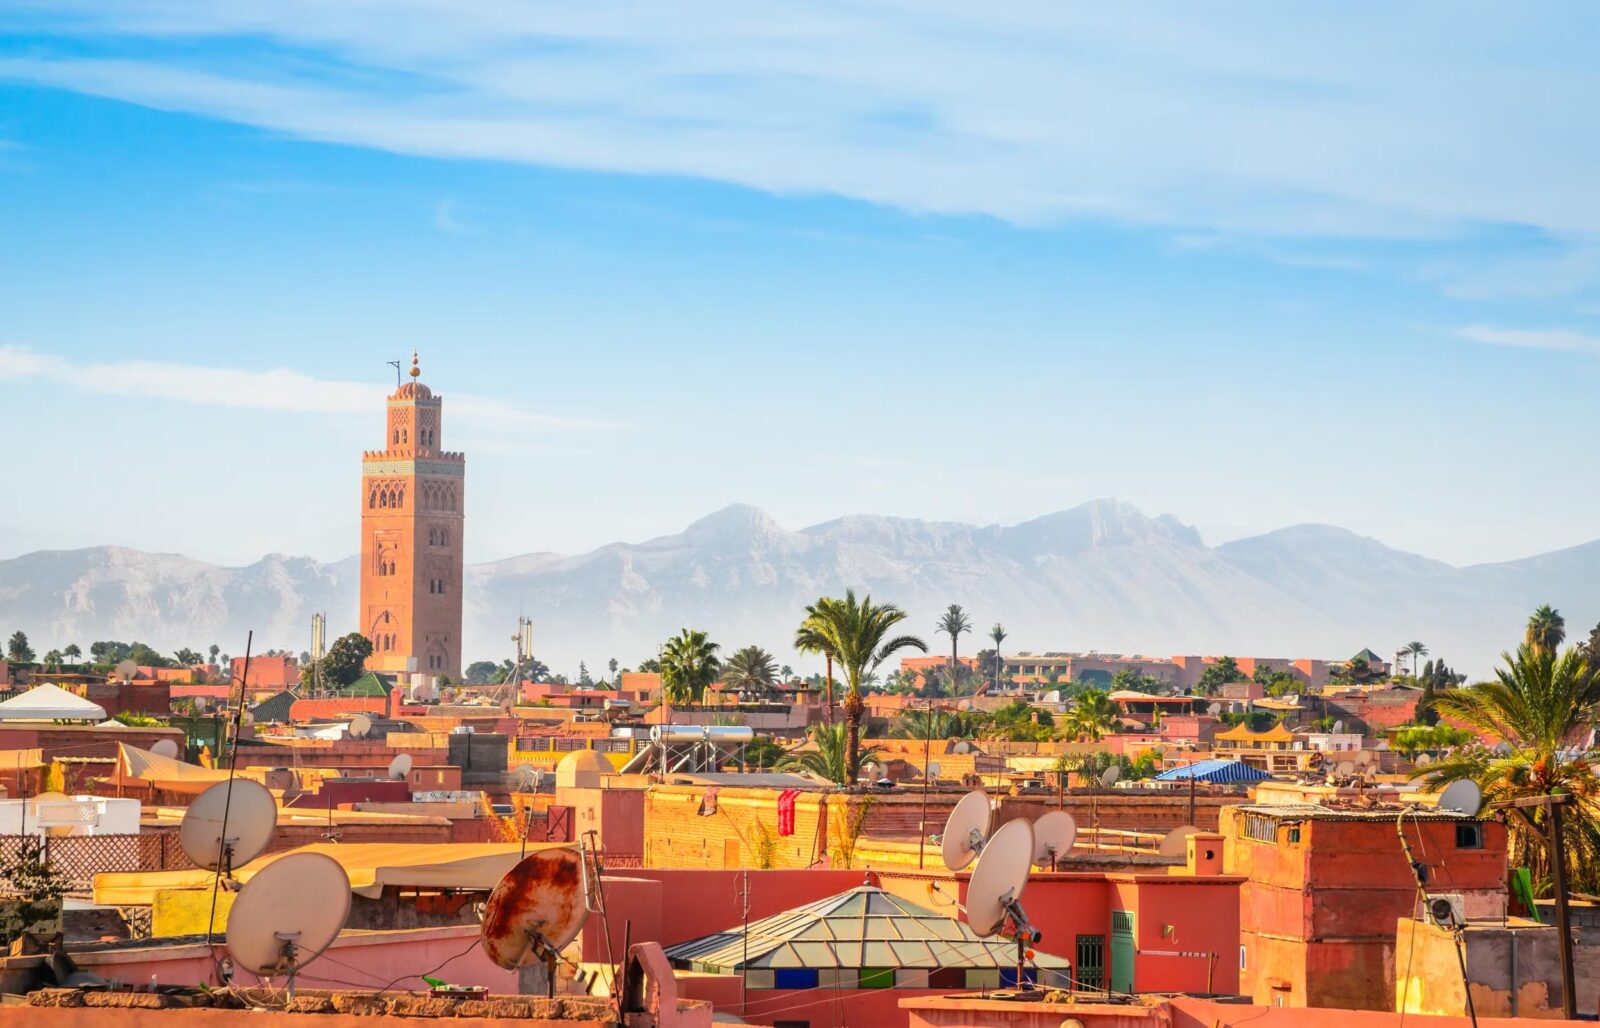 Name That City! Put Your Travel Knowledge to Test With This Picture Quiz! Marrakesh or Marrakech, Morocco